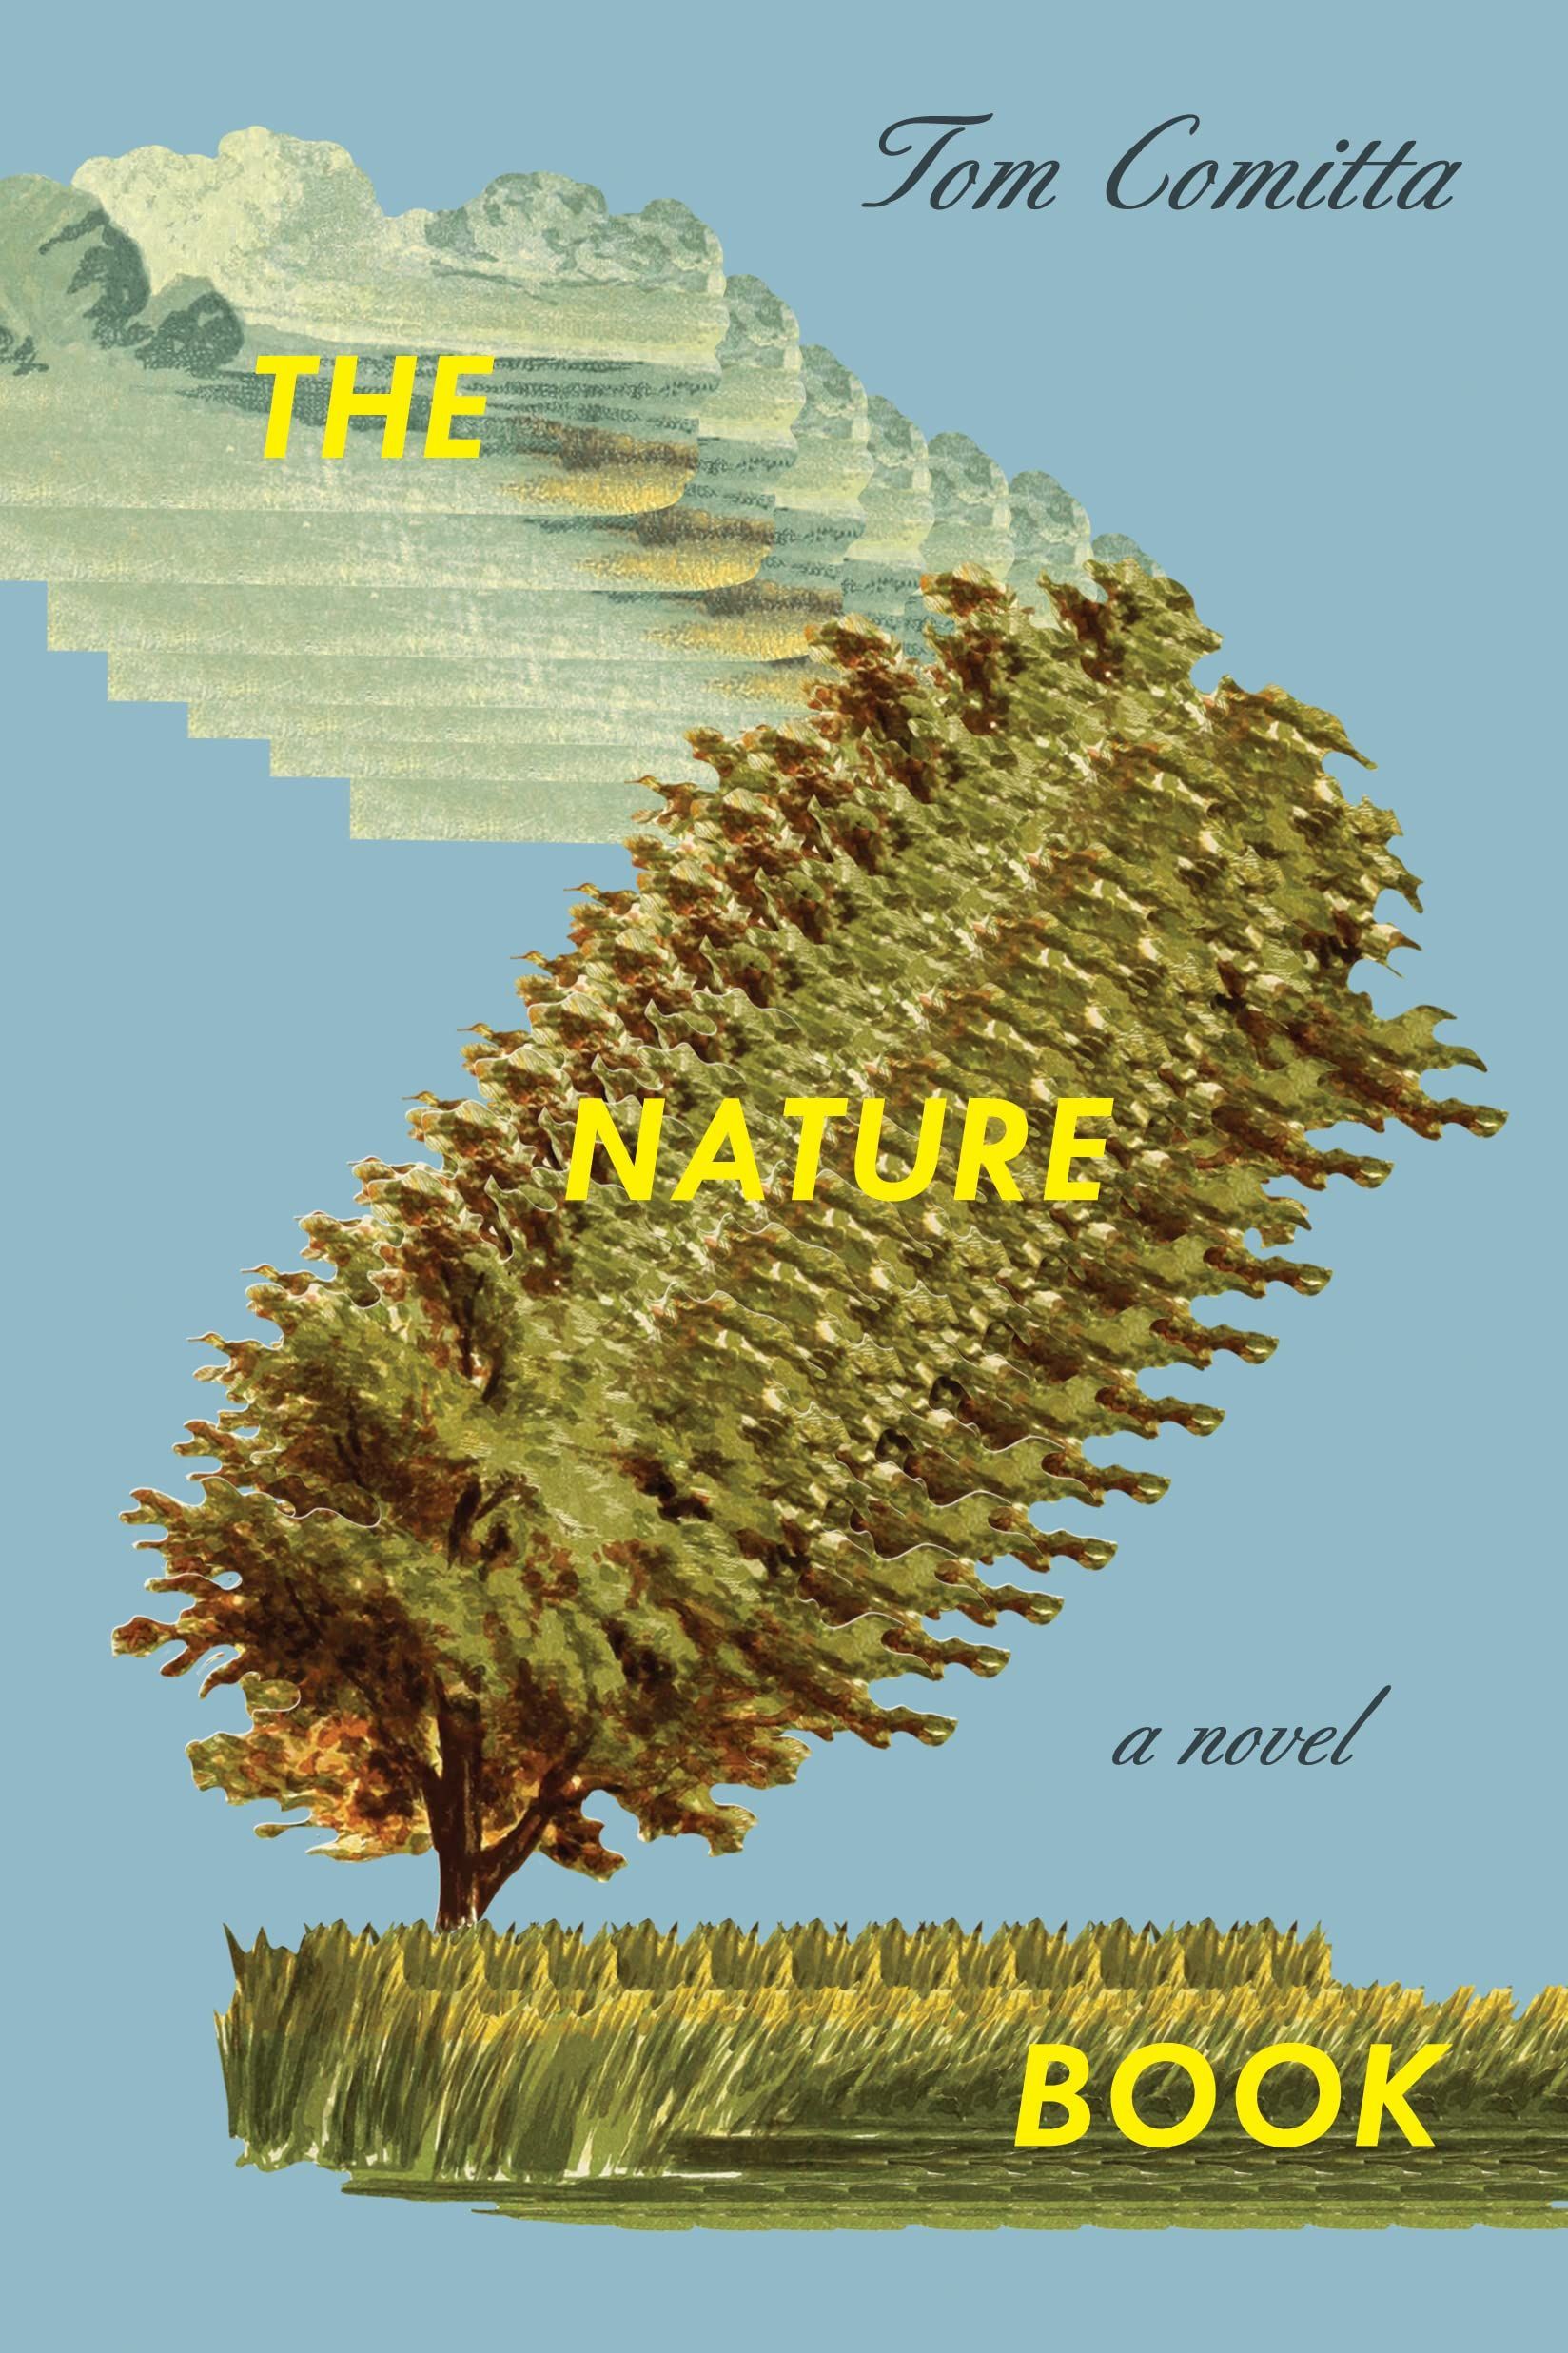 Ceaseless Life and Death: On Tom Comitta’s “The Nature Book”